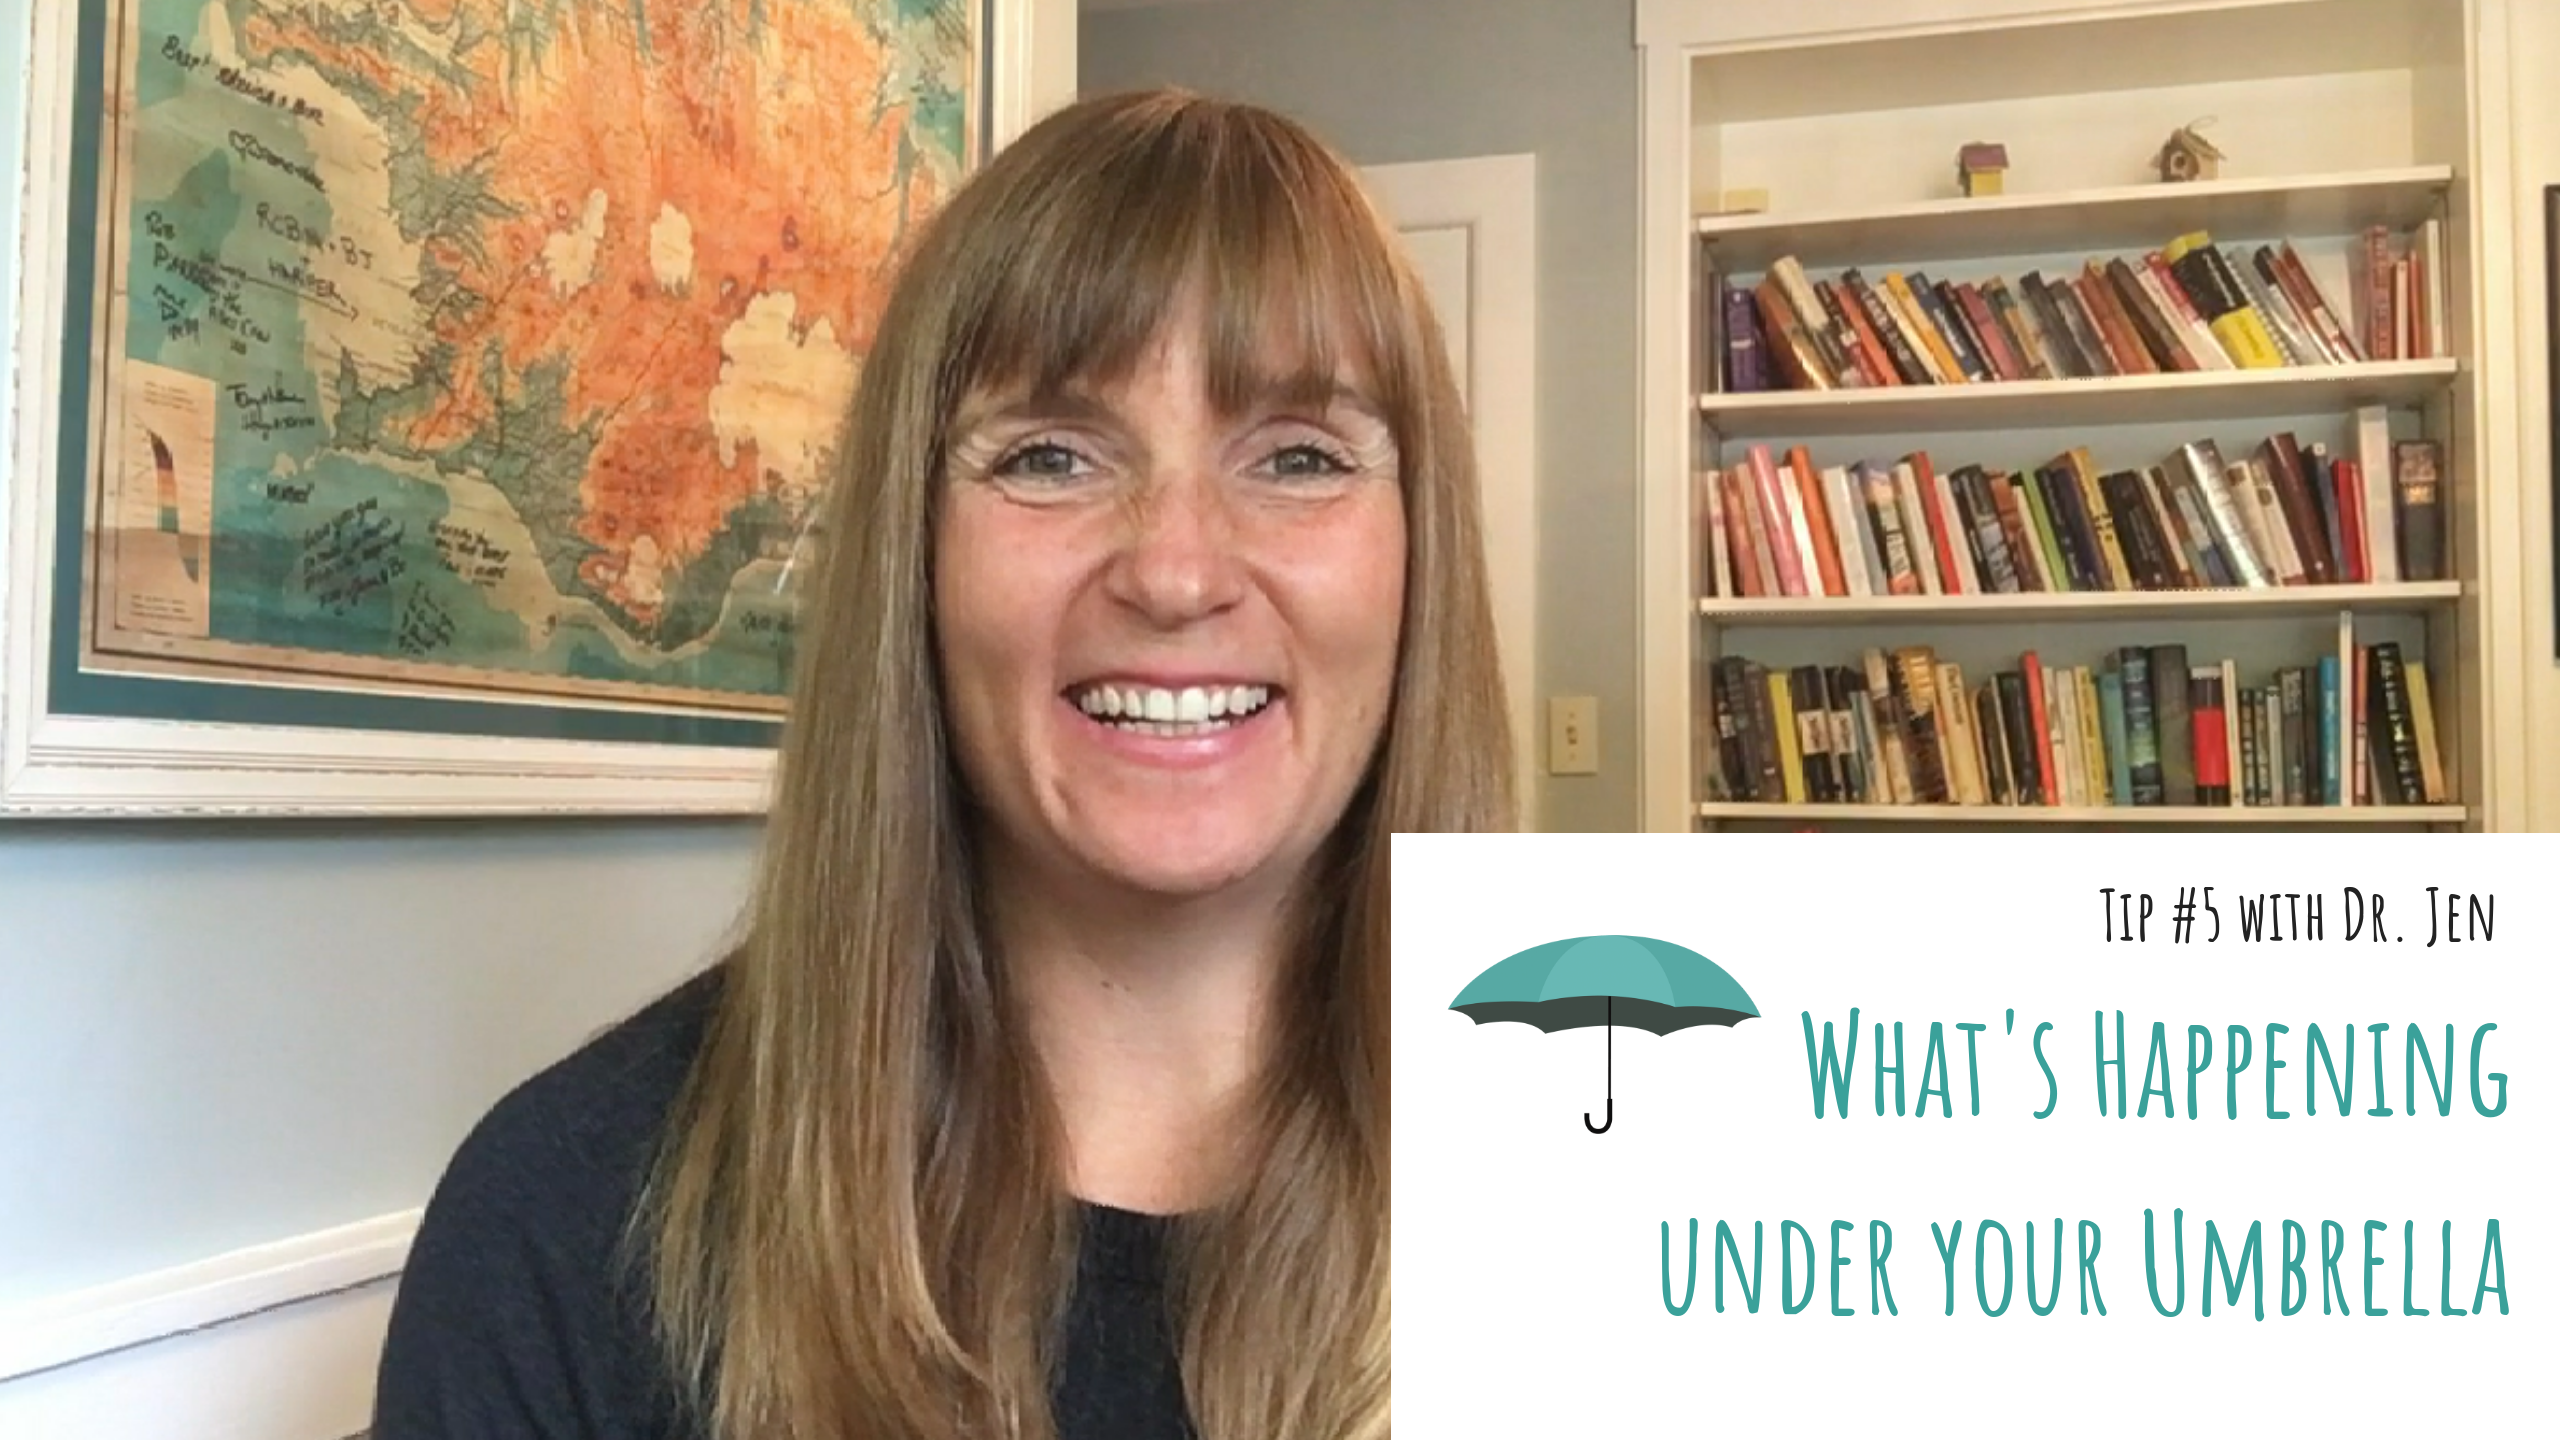 Tip #5 with Dr. Jen: What’s Happening Under Your Umbrella